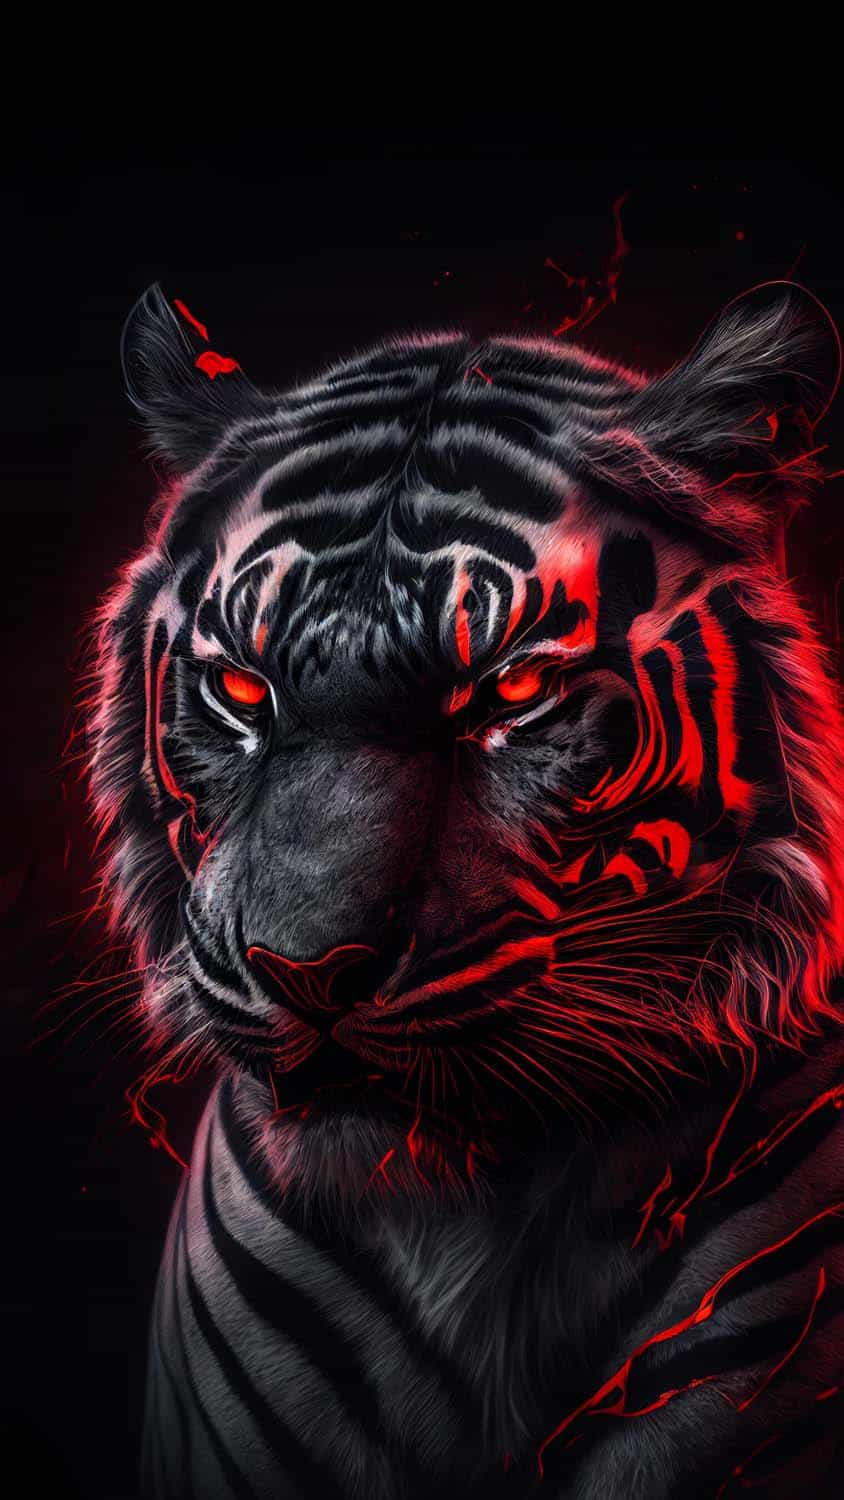 Black Tiger With A Dark Background Black Tiger Pictures Background Image  And Wallpaper for Free Download